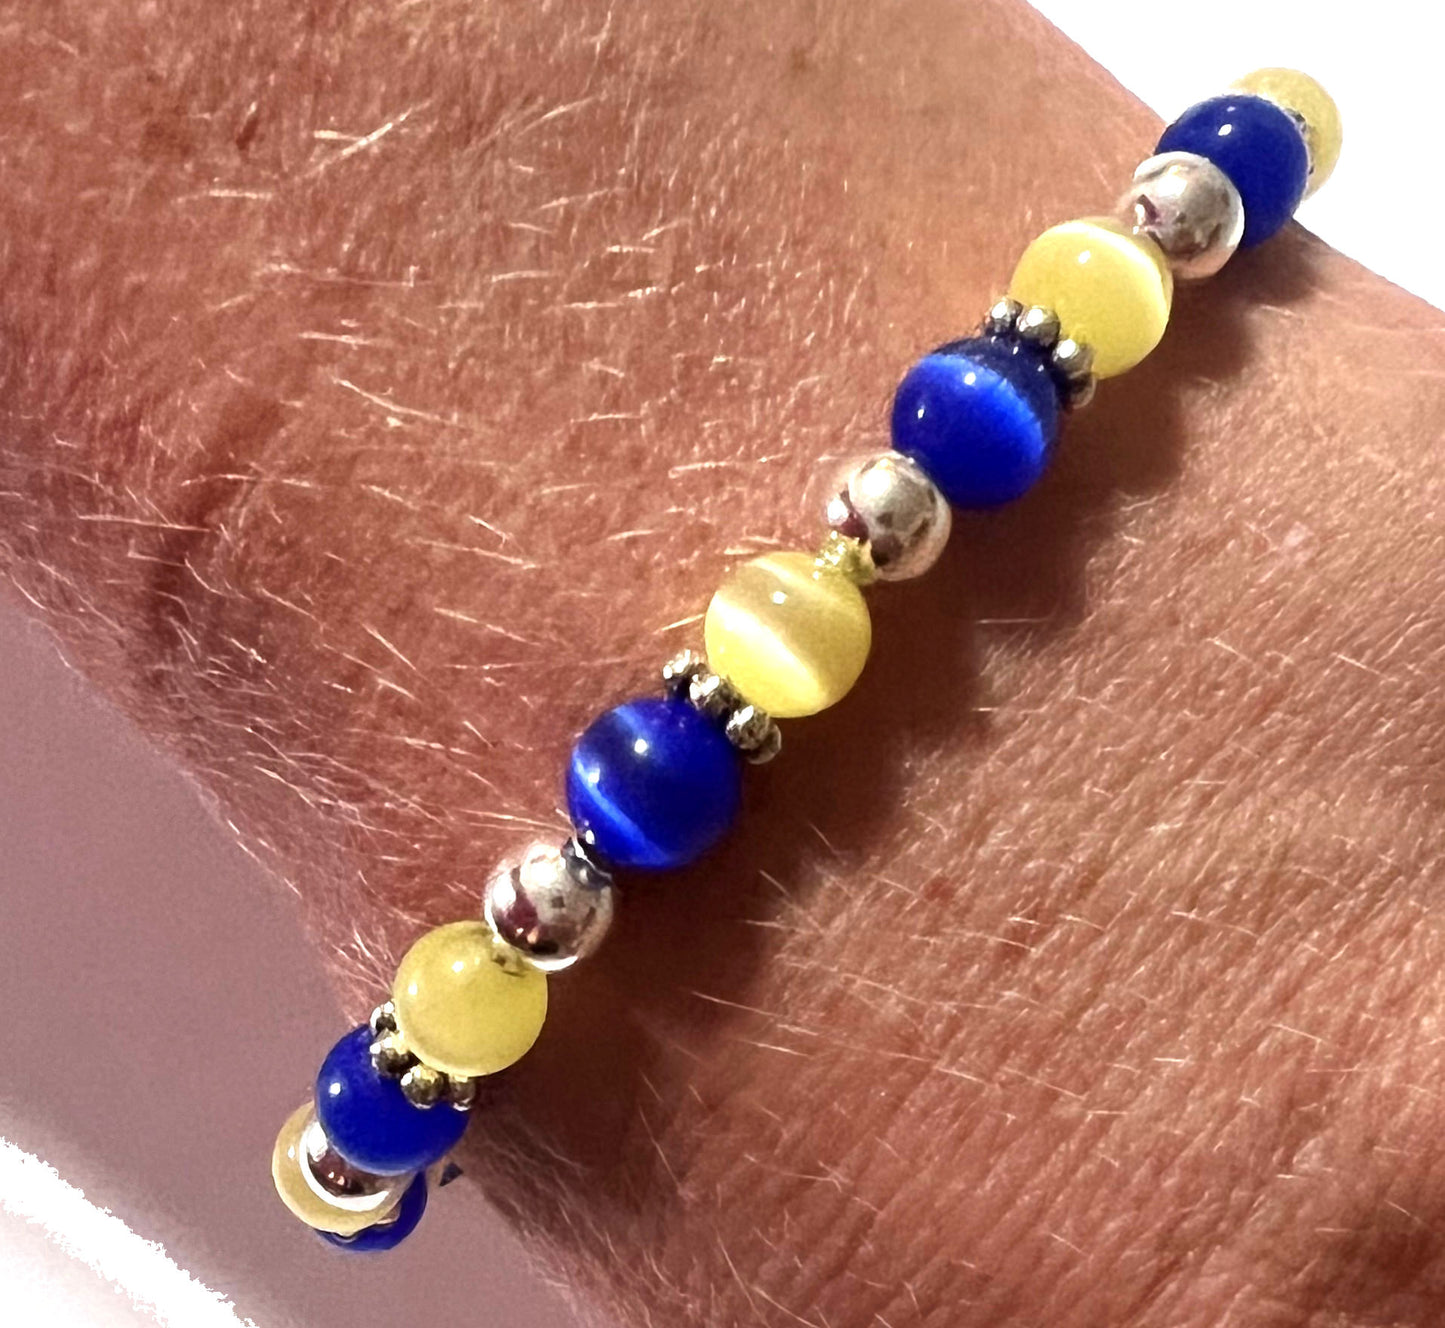 Down Syndrome Awareness Beaded Bracelet, 7.75 Inches, Yellow & Blue Colors, Hand beaded in the USA - Stretch